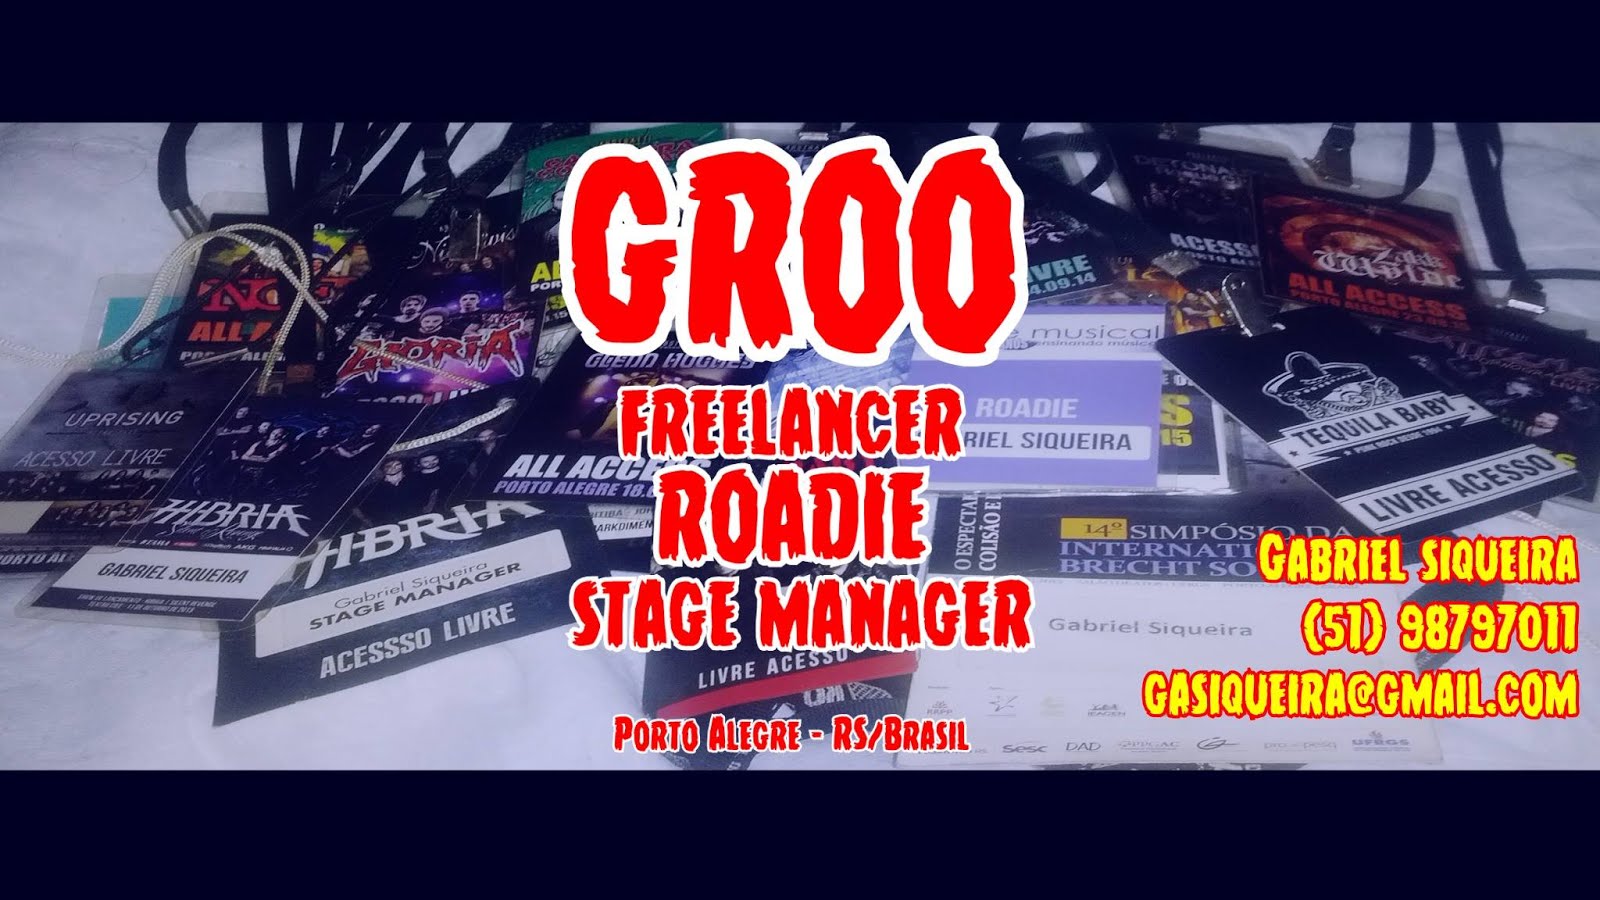 Groo: Free-lancer Musician / Roadie / Stage Manager